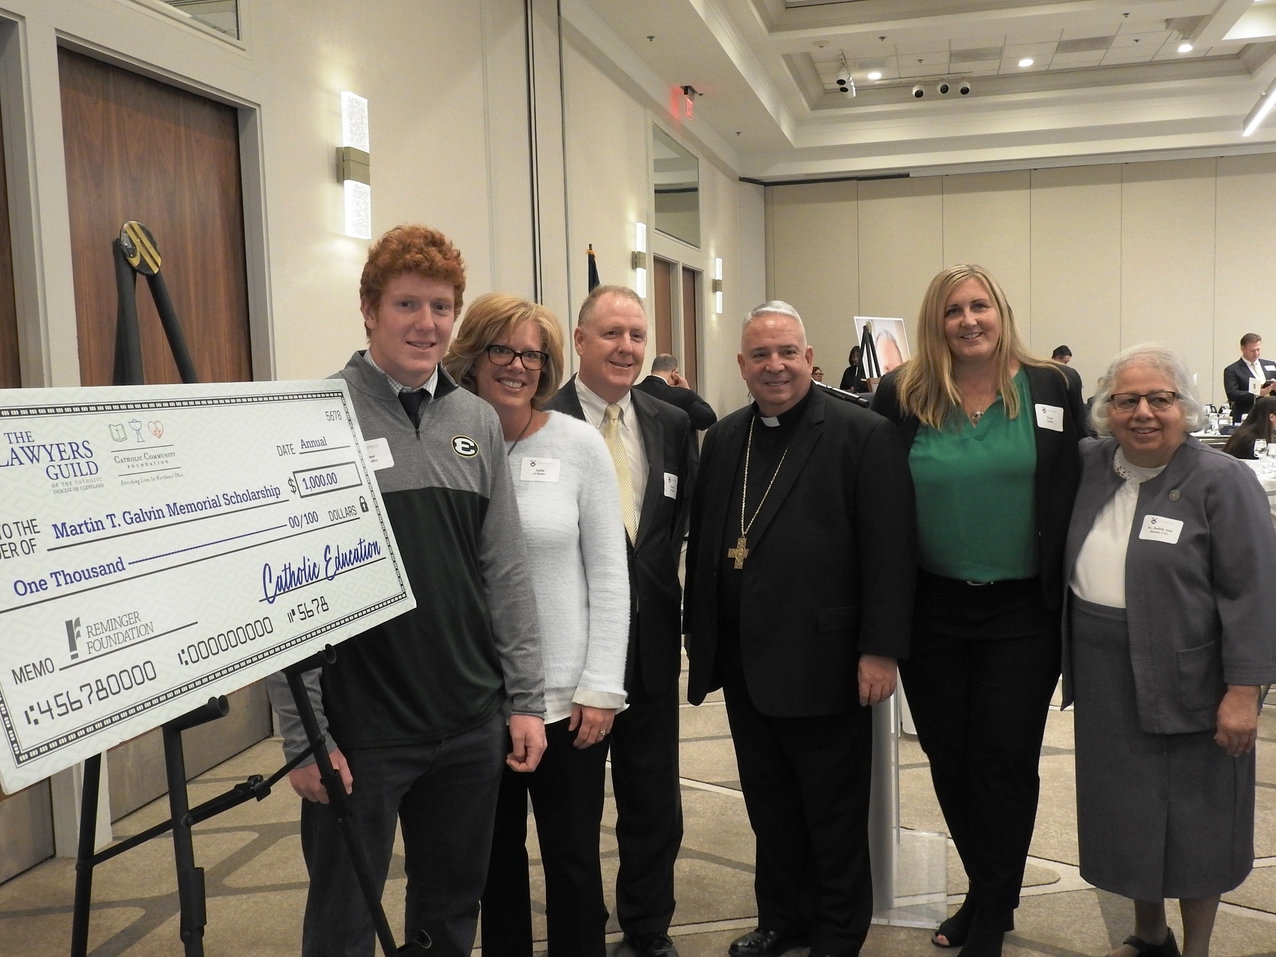 Legal community gathers for annual Red Mass, awards lunch